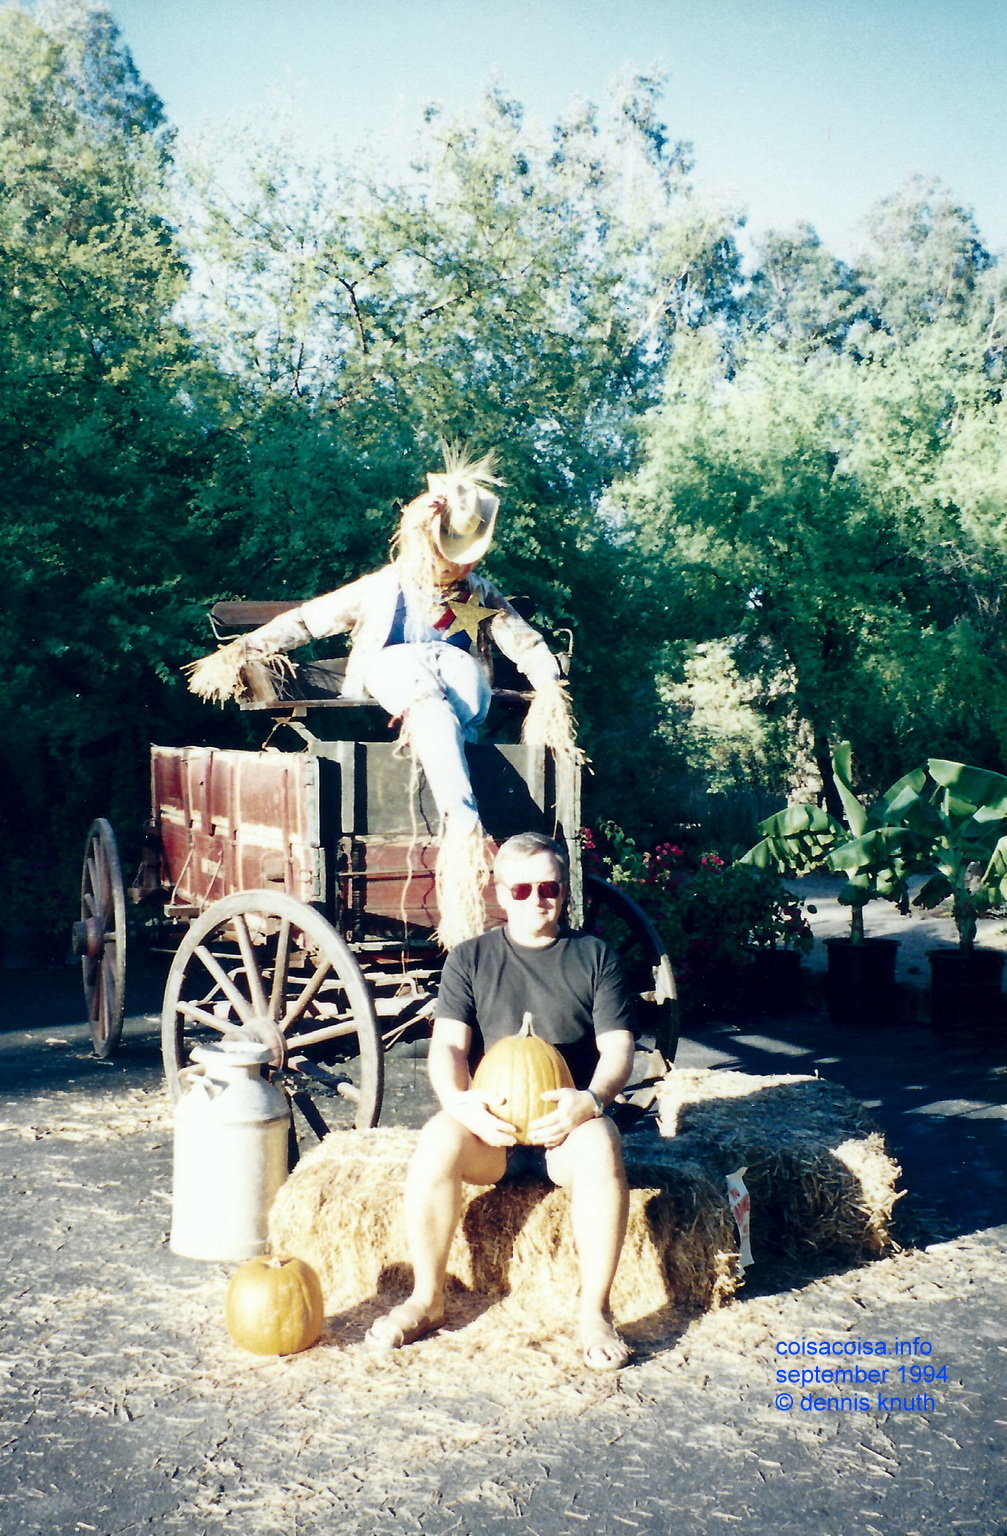 Dennis Knuth with a scarecrow at the Phoenix Zoo